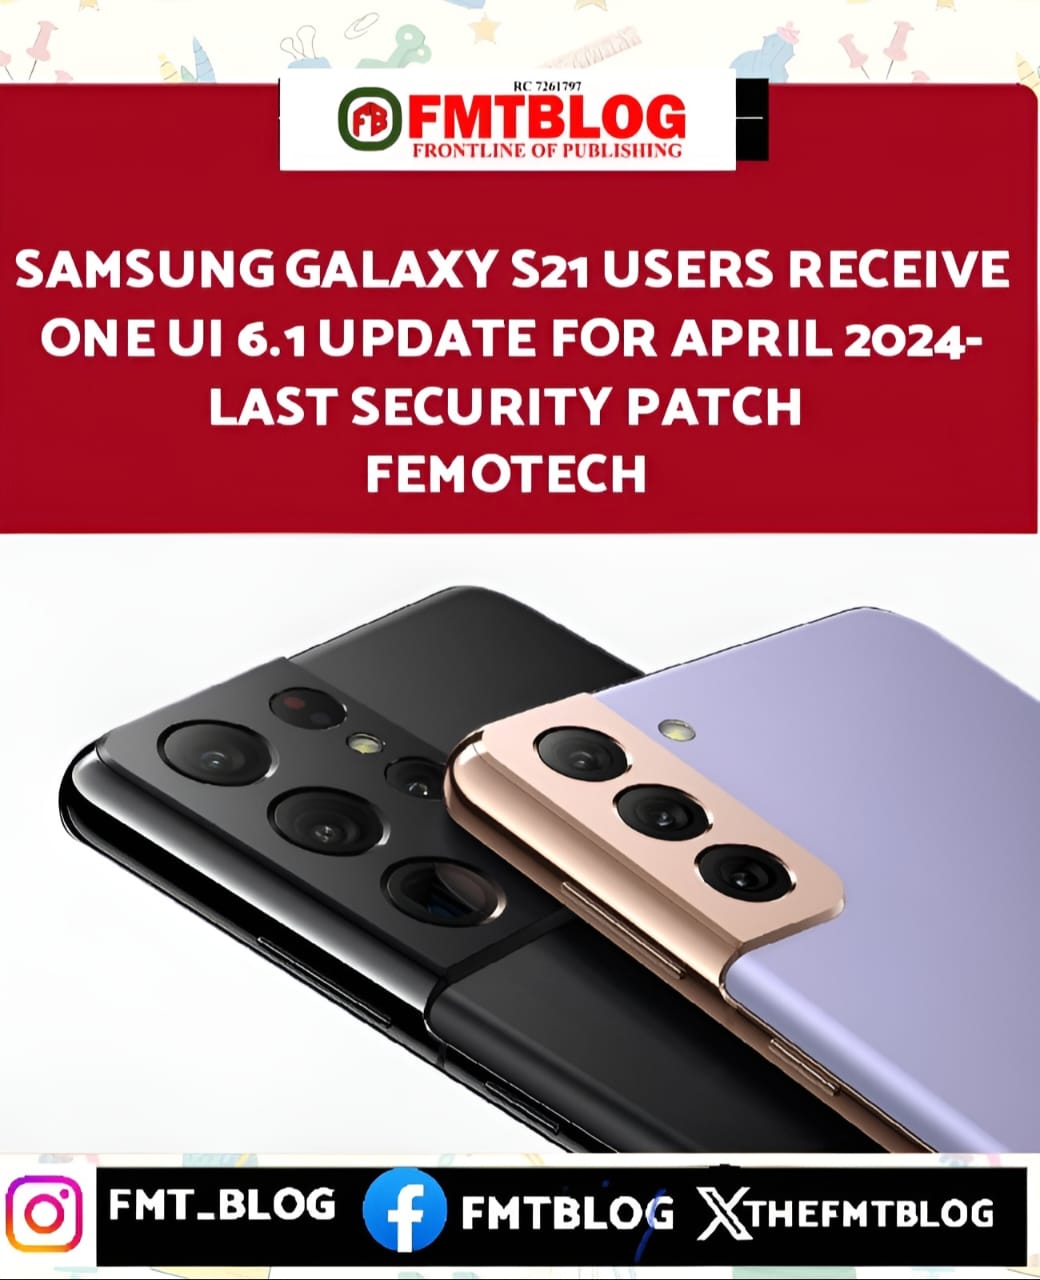 Samsung Galaxy S21 Users Receive ONE UI 6.1 Update For April 2024- Last Security Patch